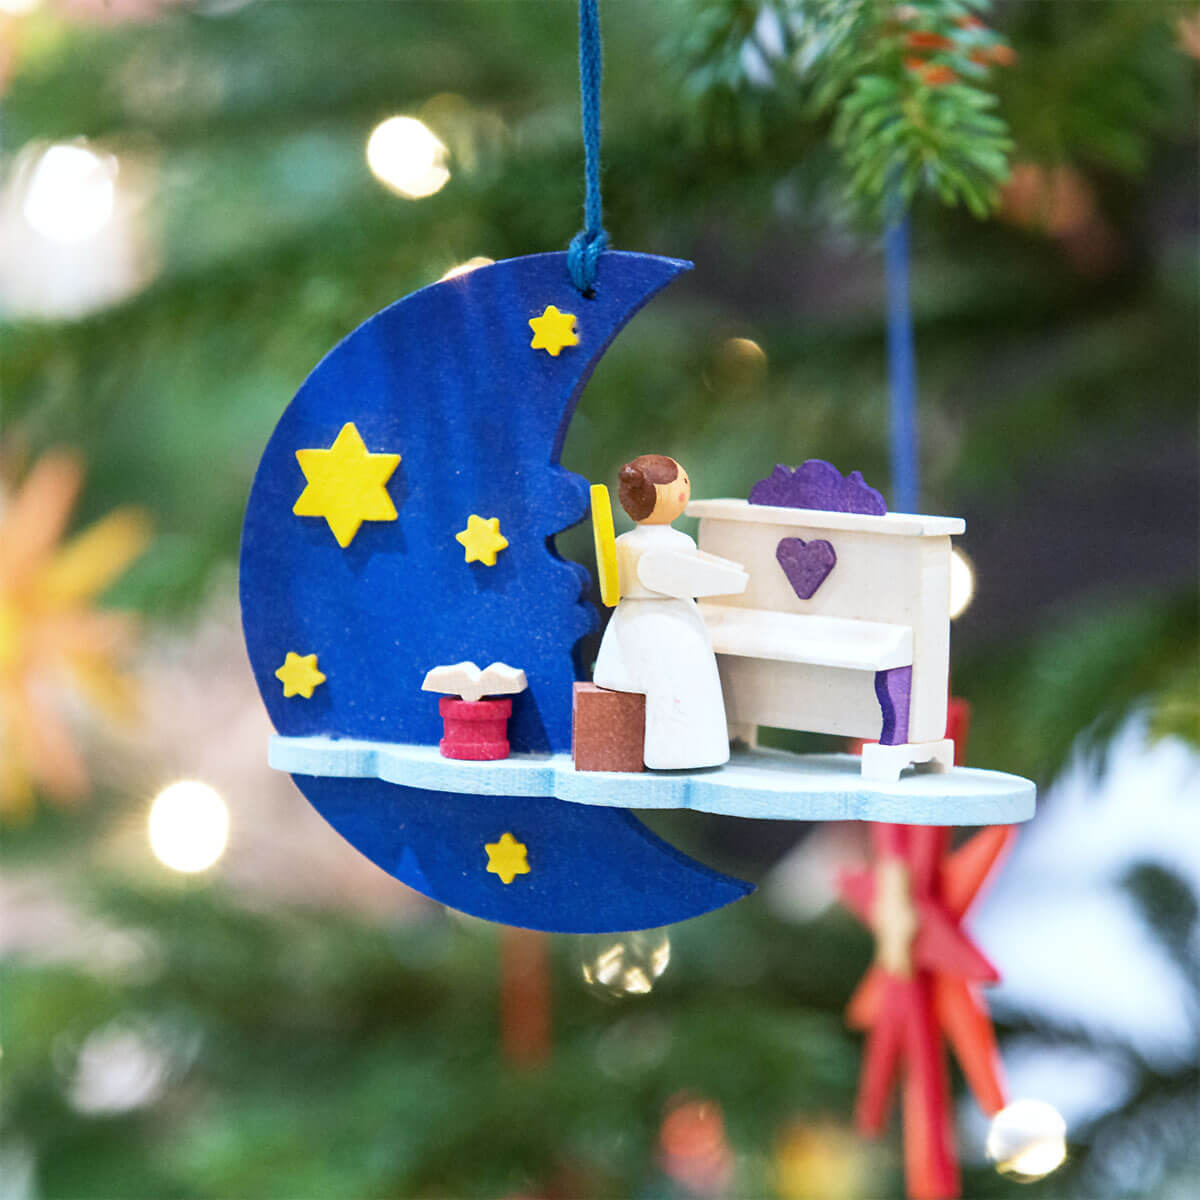 Moon & Cloud 'Angel' Ornament with sewing machine